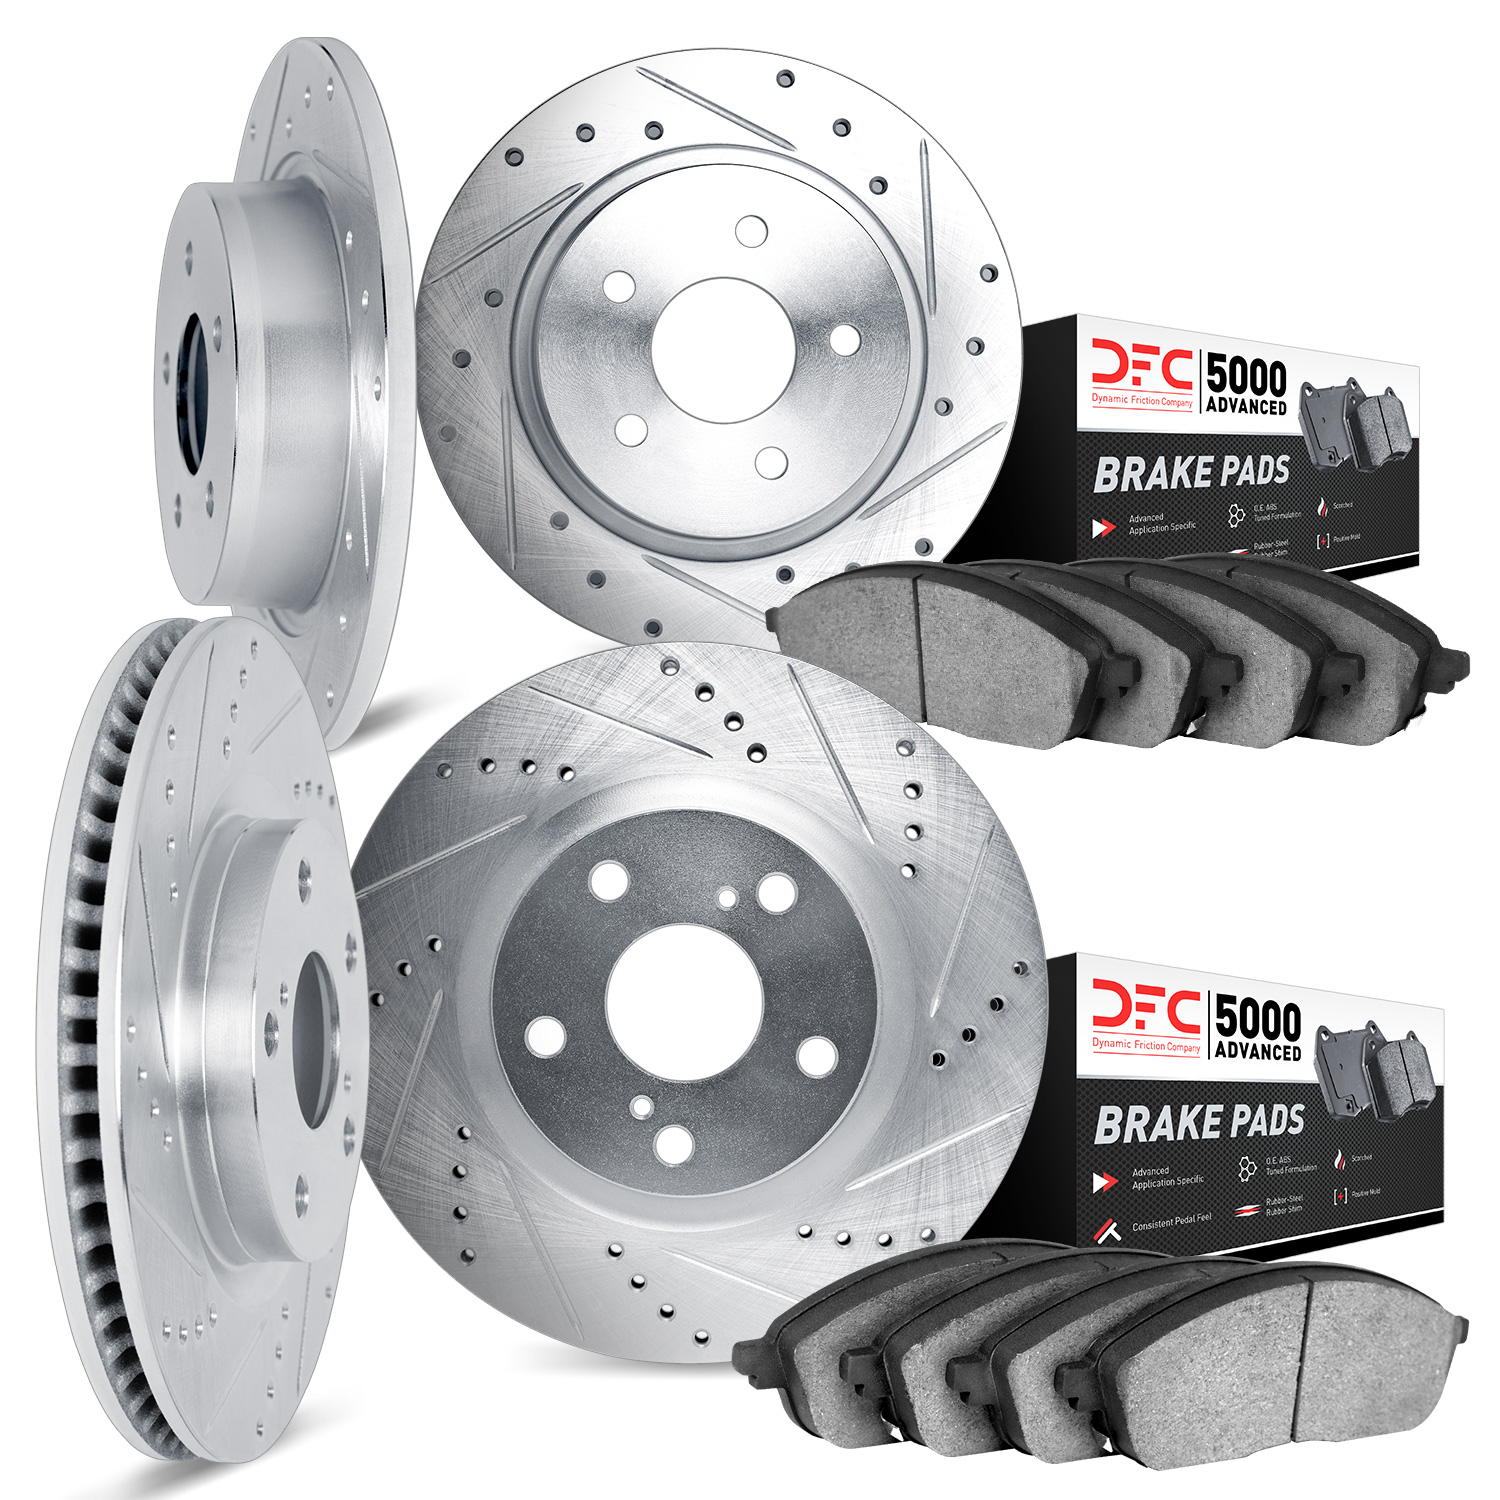 7504-67099 Drilled/Slotted Brake Rotors w/5000 Advanced Brake Pads Kit [Silver], 2013-2019 Infiniti/Nissan, Position: Front and